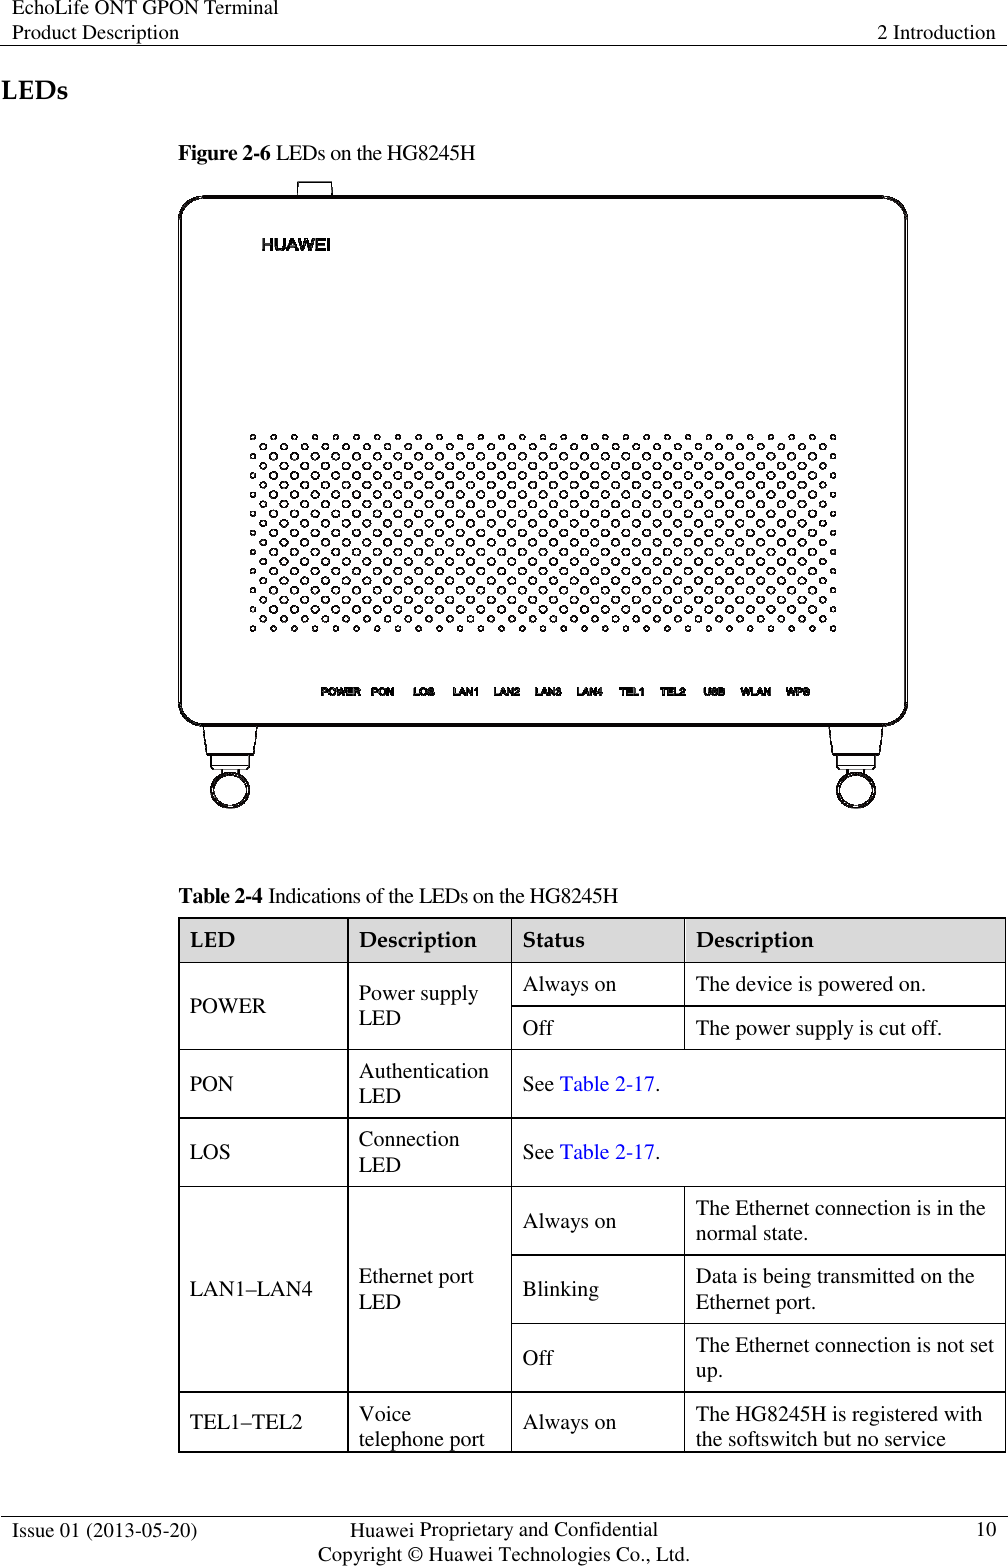 EchoLife ONT GPON Terminal Product Description  2 Introduction  Issue 01 (2013-05-20)  Huawei Proprietary and Confidential                                     Copyright © Huawei Technologies Co., Ltd. 10  LEDs Figure 2-6 LEDs on the HG8245H   Table 2-4 Indications of the LEDs on the HG8245H LED  Description  Status  Description POWER  Power supply LED Always on  The device is powered on. Off  The power supply is cut off. PON  Authentication LED  See Table 2-17. LOS  Connection LED  See Table 2-17. LAN1–LAN4  Ethernet port LED Always on  The Ethernet connection is in the normal state. Blinking  Data is being transmitted on the Ethernet port. Off  The Ethernet connection is not set up. TEL1–TEL2  Voice telephone port  Always on  The HG8245H is registered with the softswitch but no service 